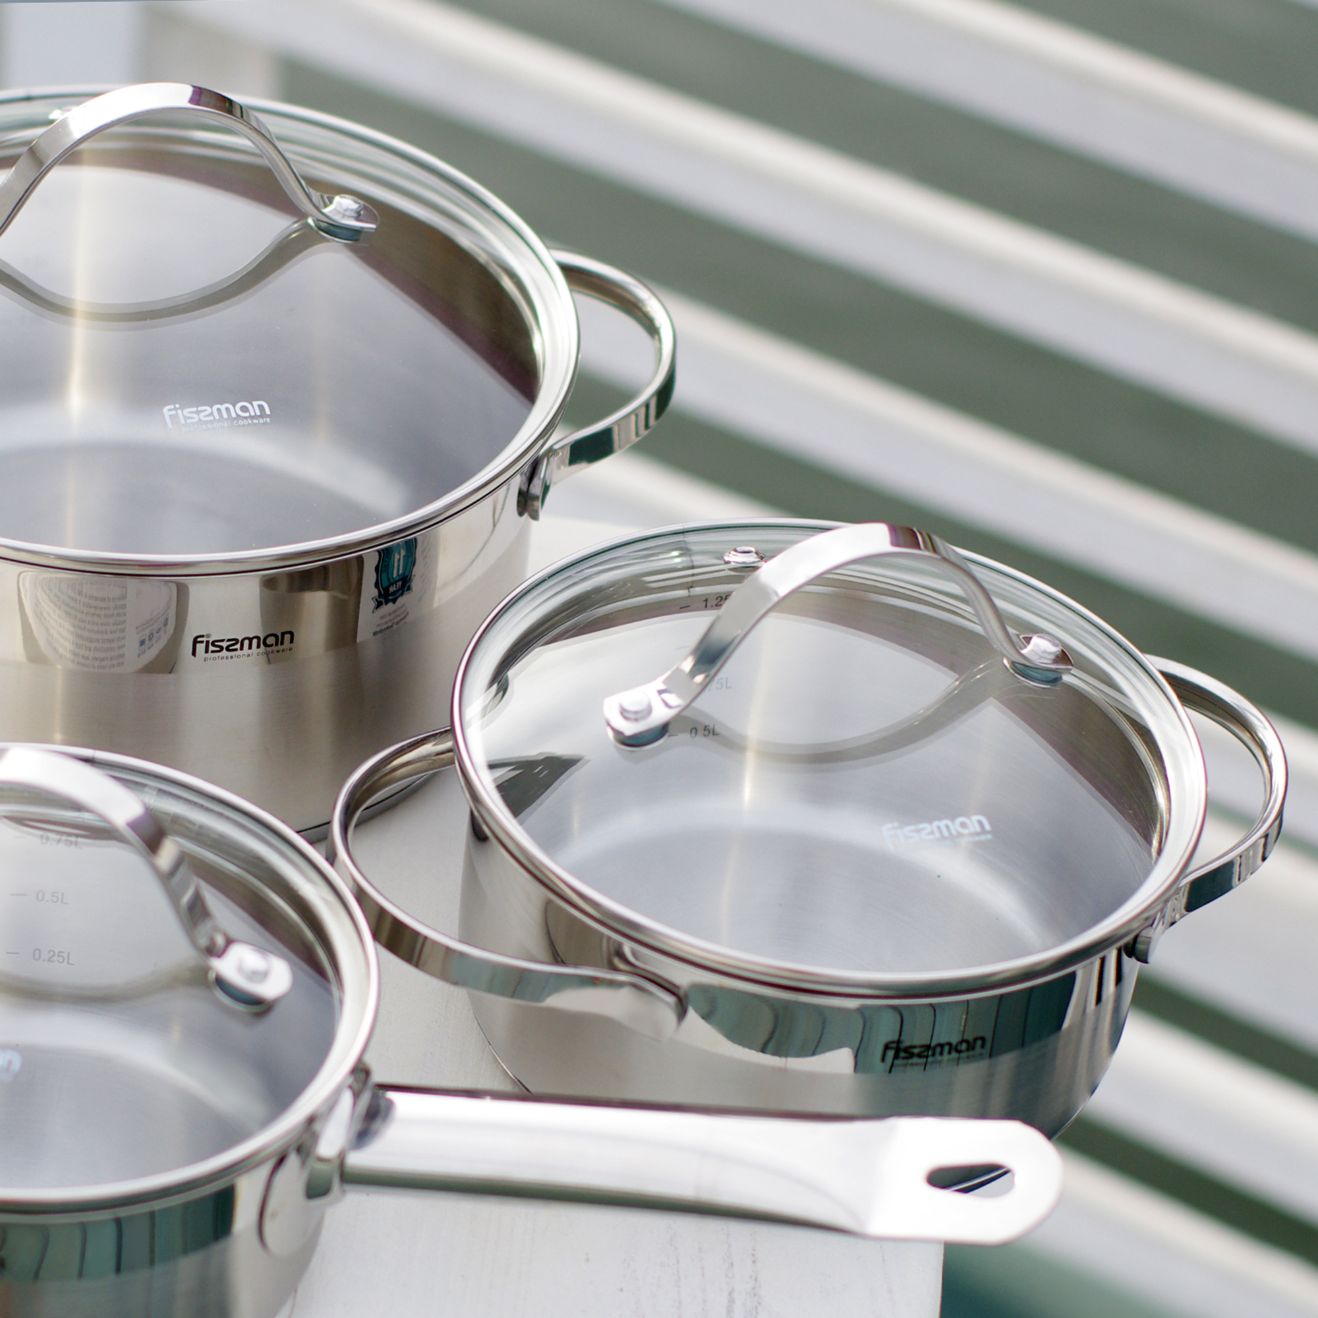 Types Of Casserole Pans: Which One Should I Use?